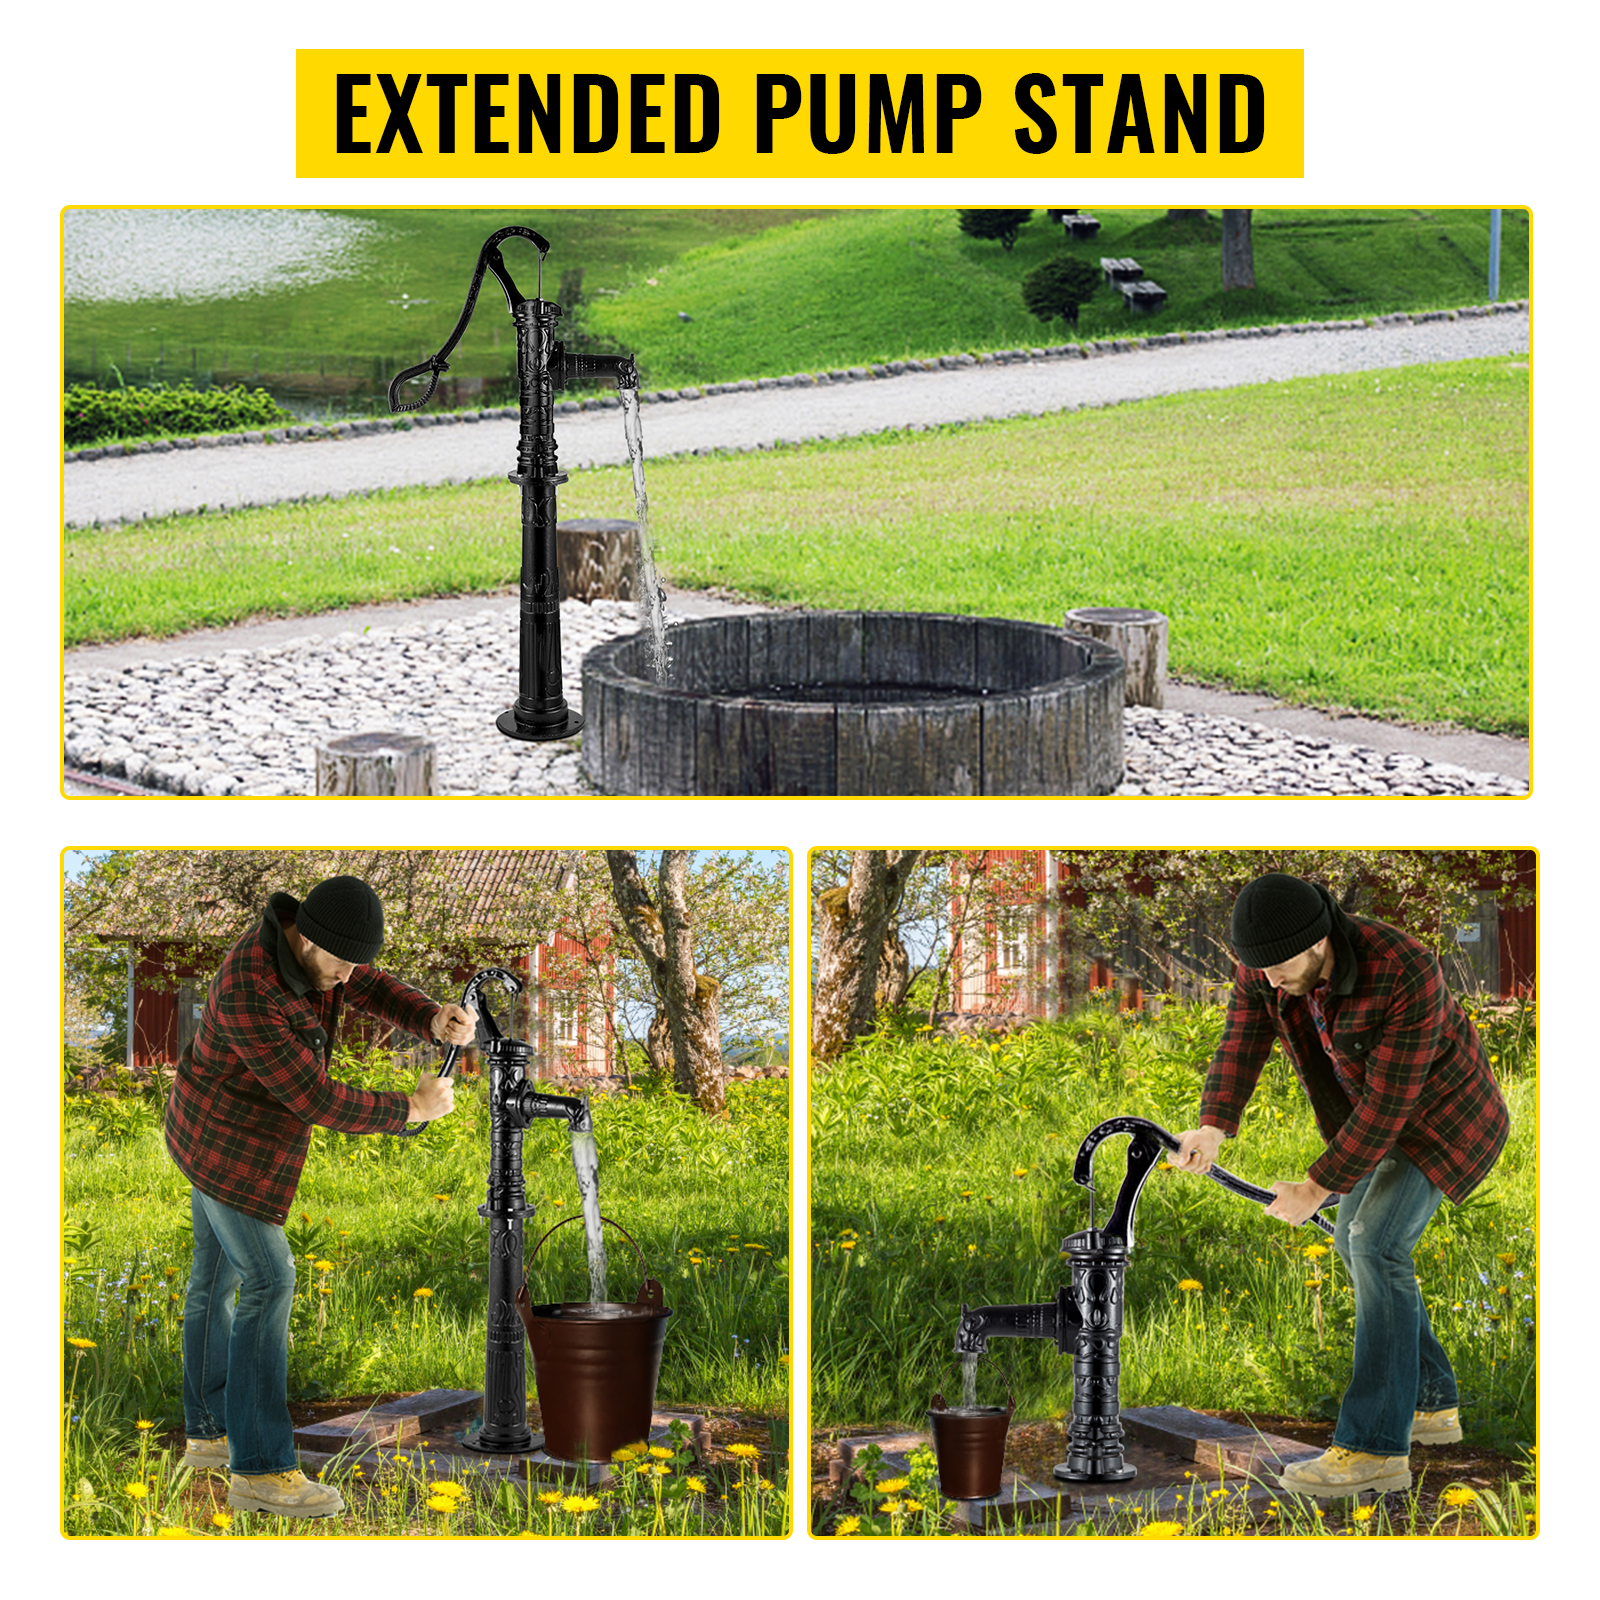  Efficient and Durable Stainless Steel hand water pump for well  for Home Garden Yard - 10m/32.8ft Range Pumping, Easy to Operate and  Install with Abundant Accessories Included : Patio, Lawn 